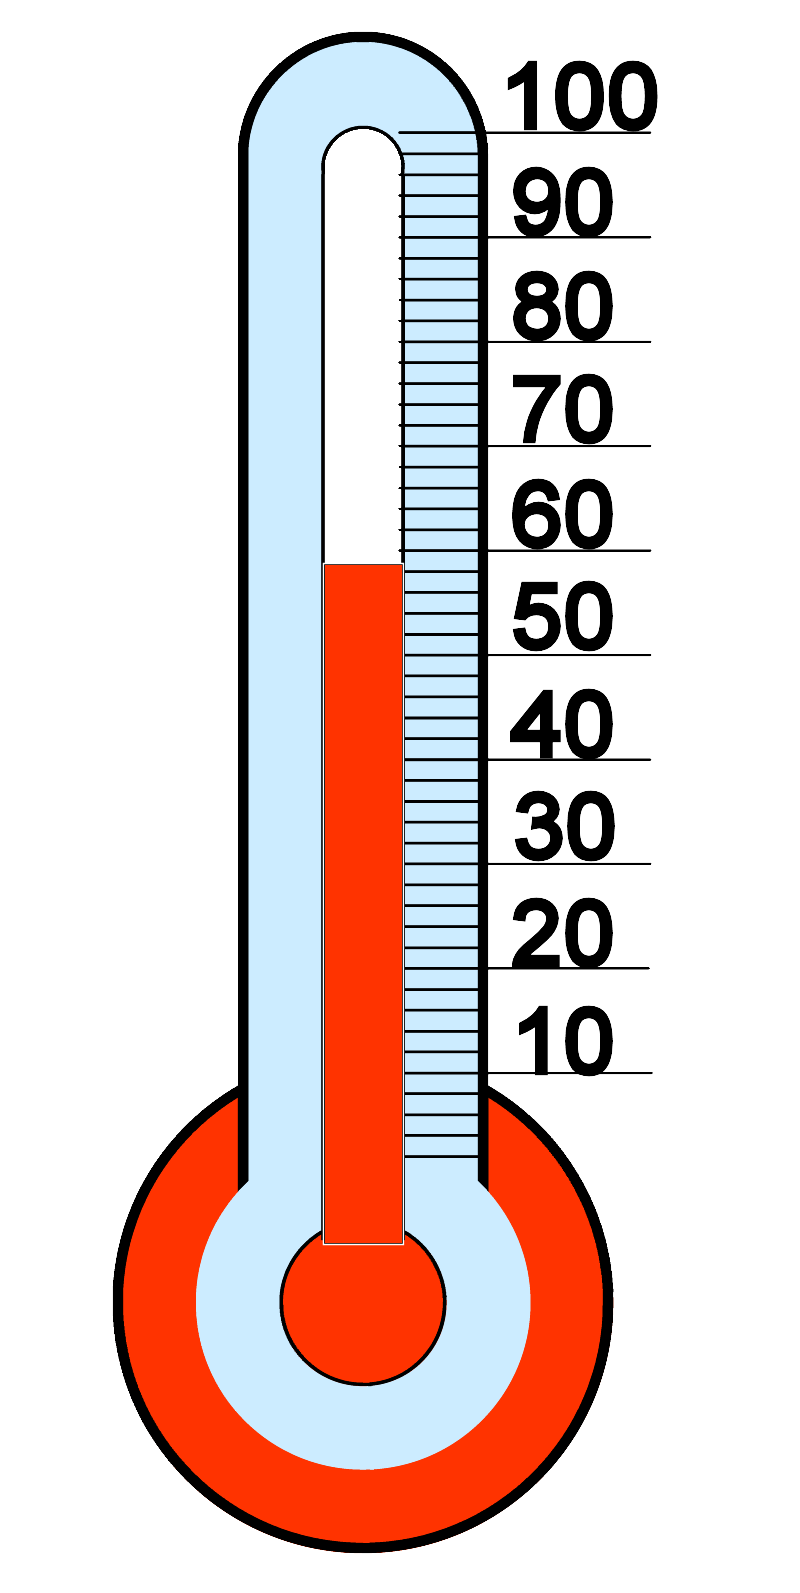 fundraiser-clipart-thermometer-goal-chart-fundraiser-thermometer-goal